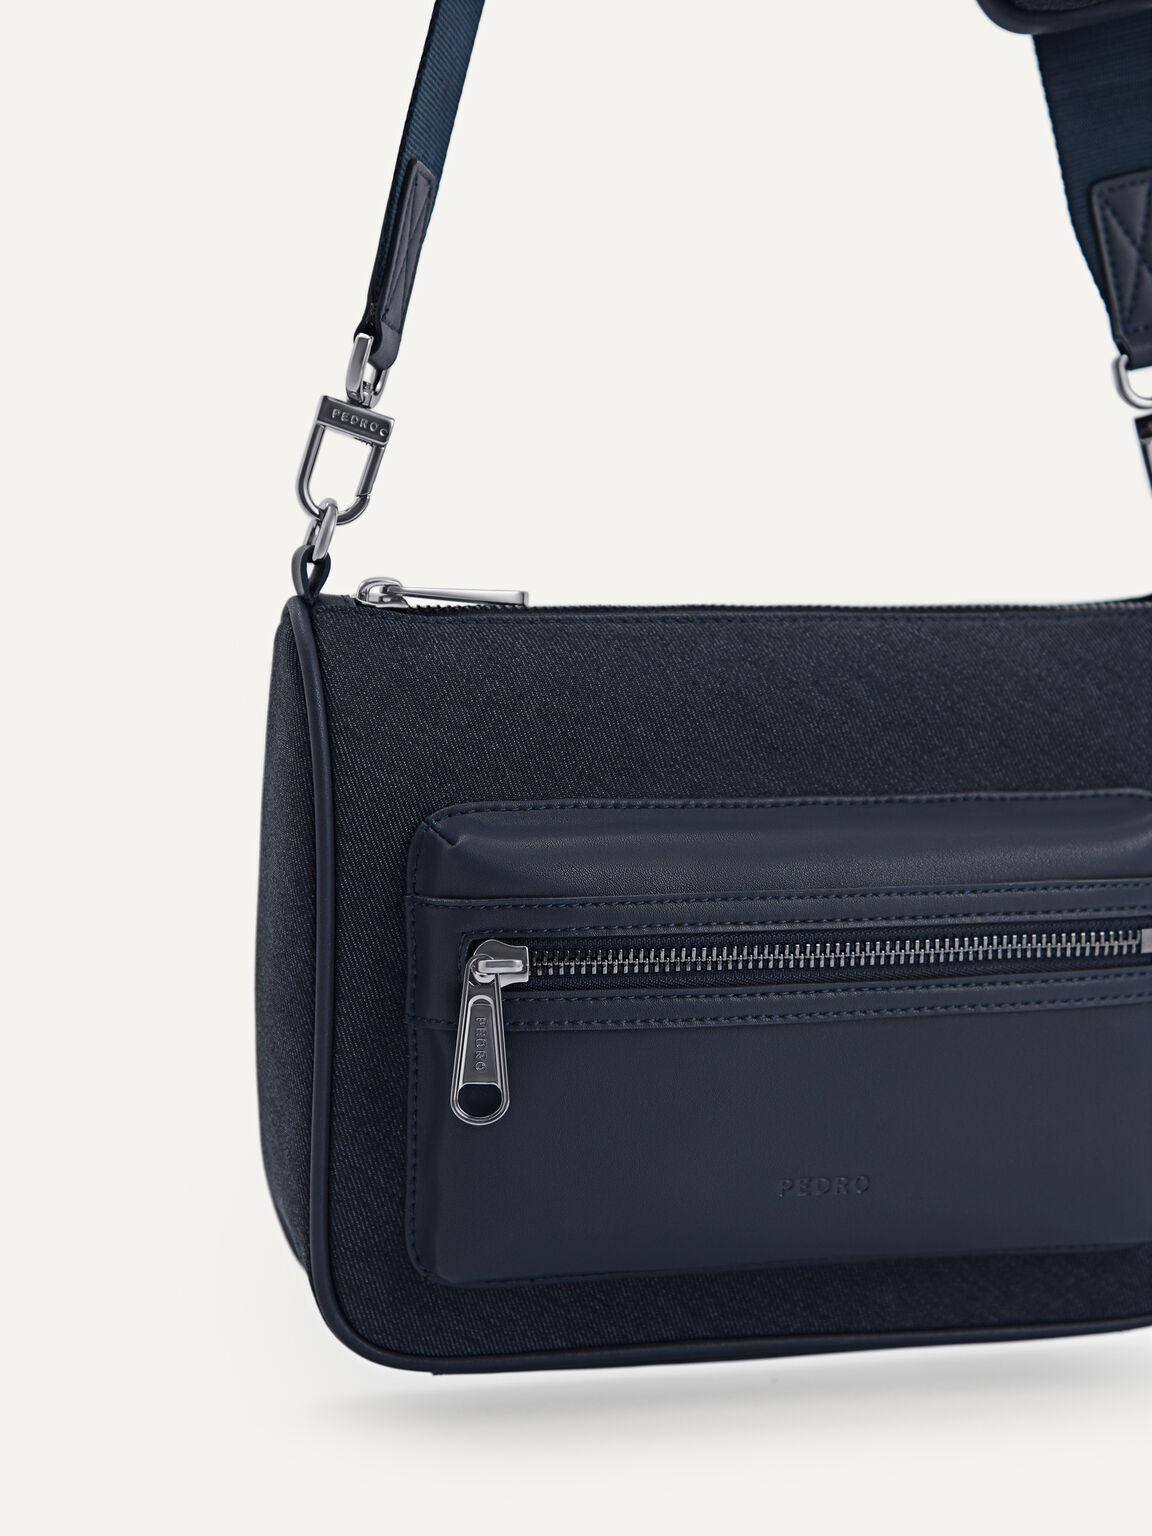 Denim Sling Bag with Pouch, Navy, hi-res